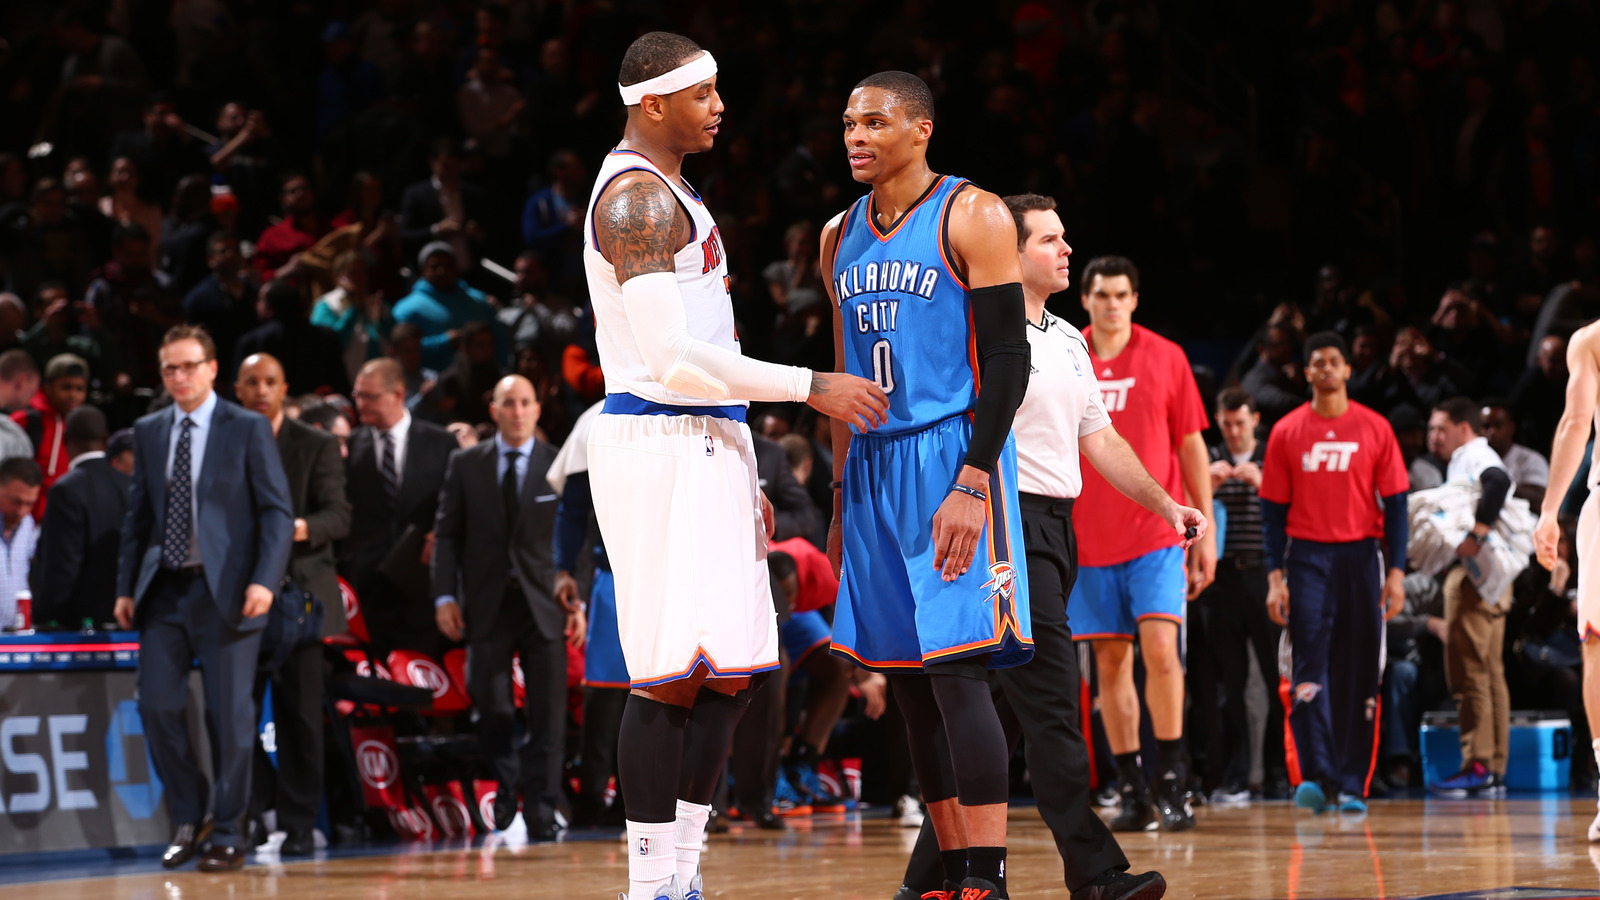 Melo Drama Is Over, Carmelo Goes To Thunder - Russell Westbrook Paul George Carmelo Anthony - HD Wallpaper 